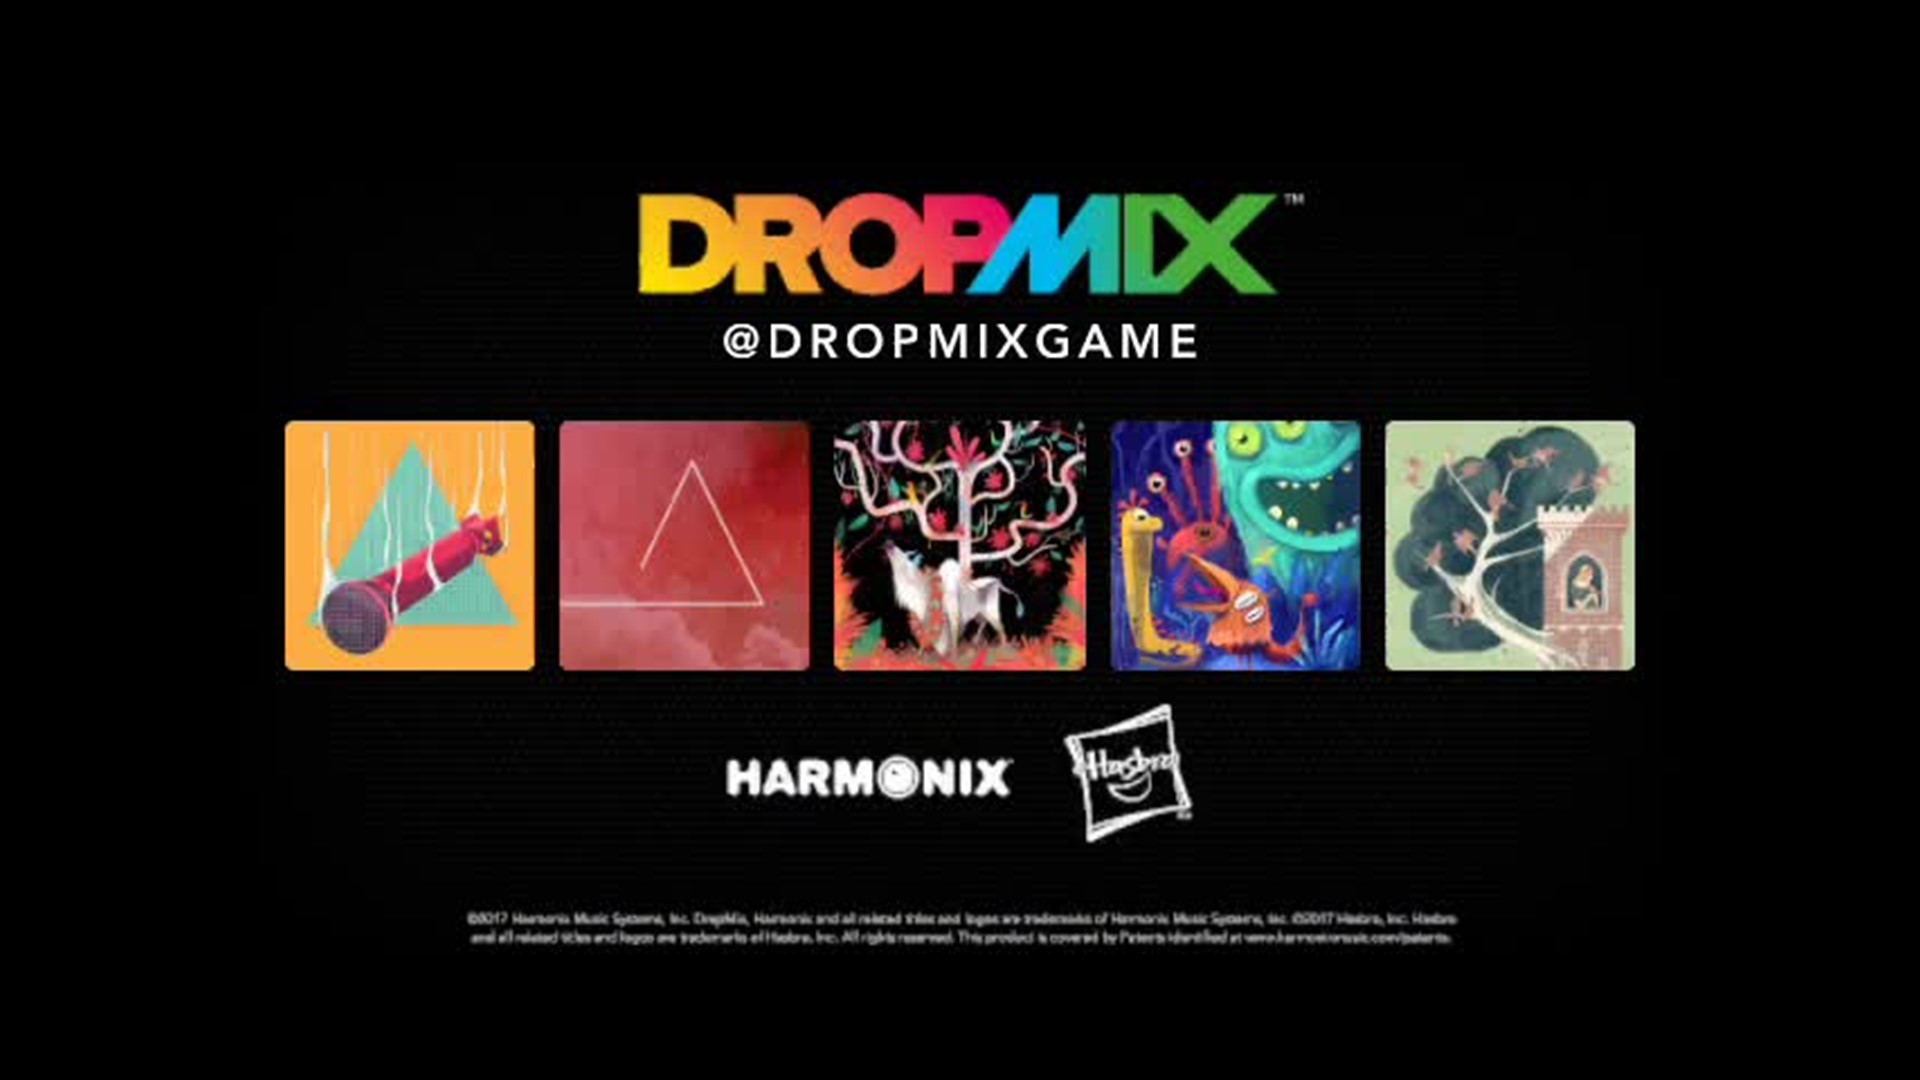 "DropMix" merges tech and music into a magical card game